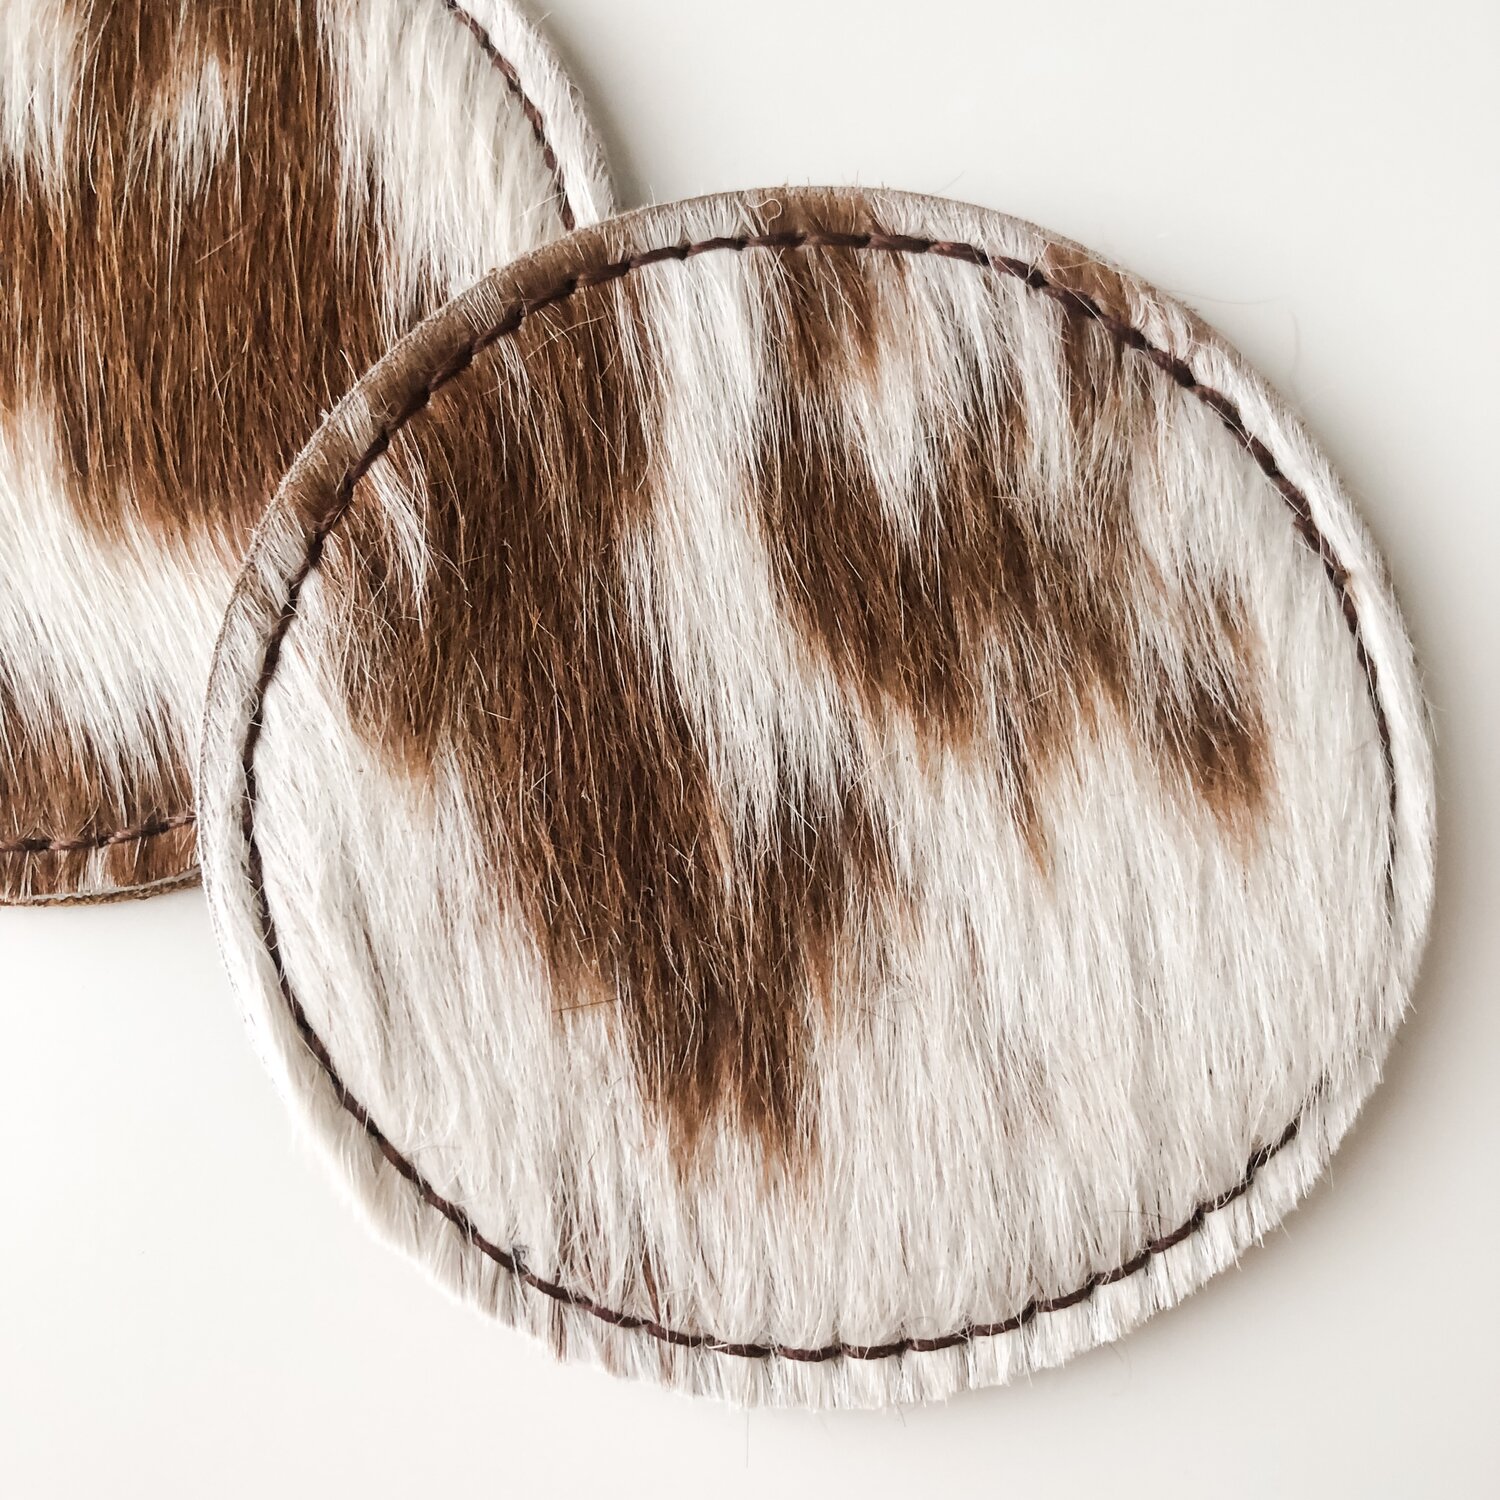 NGF Cowhide Coaster Set of 6 Pcs Natural Cowhide Drink Coasters Hair on Square Coasters Leather Tea Cup Coasters Home Decor & Home Living Ideas